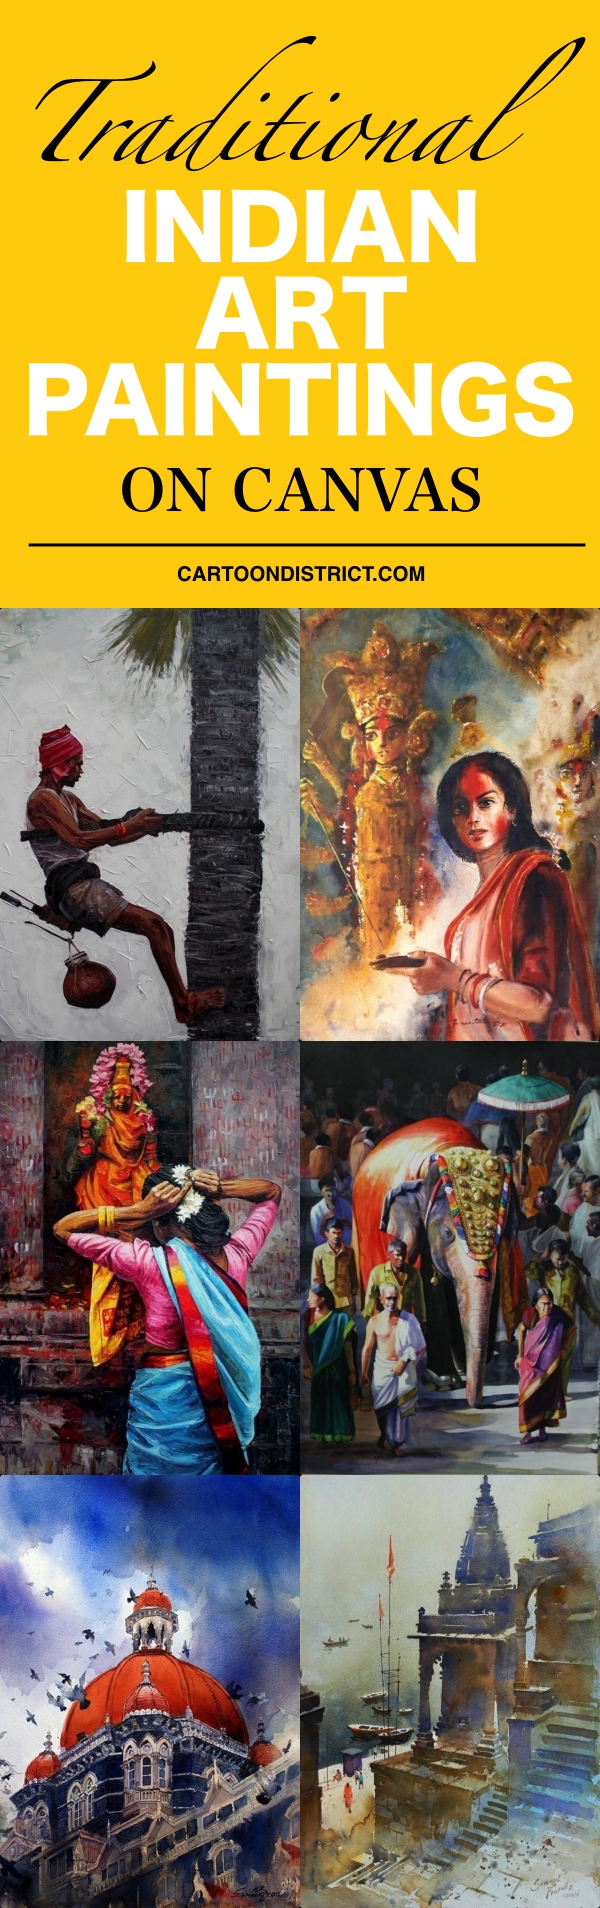 Traditional Indian Art Paintings on Canvas 